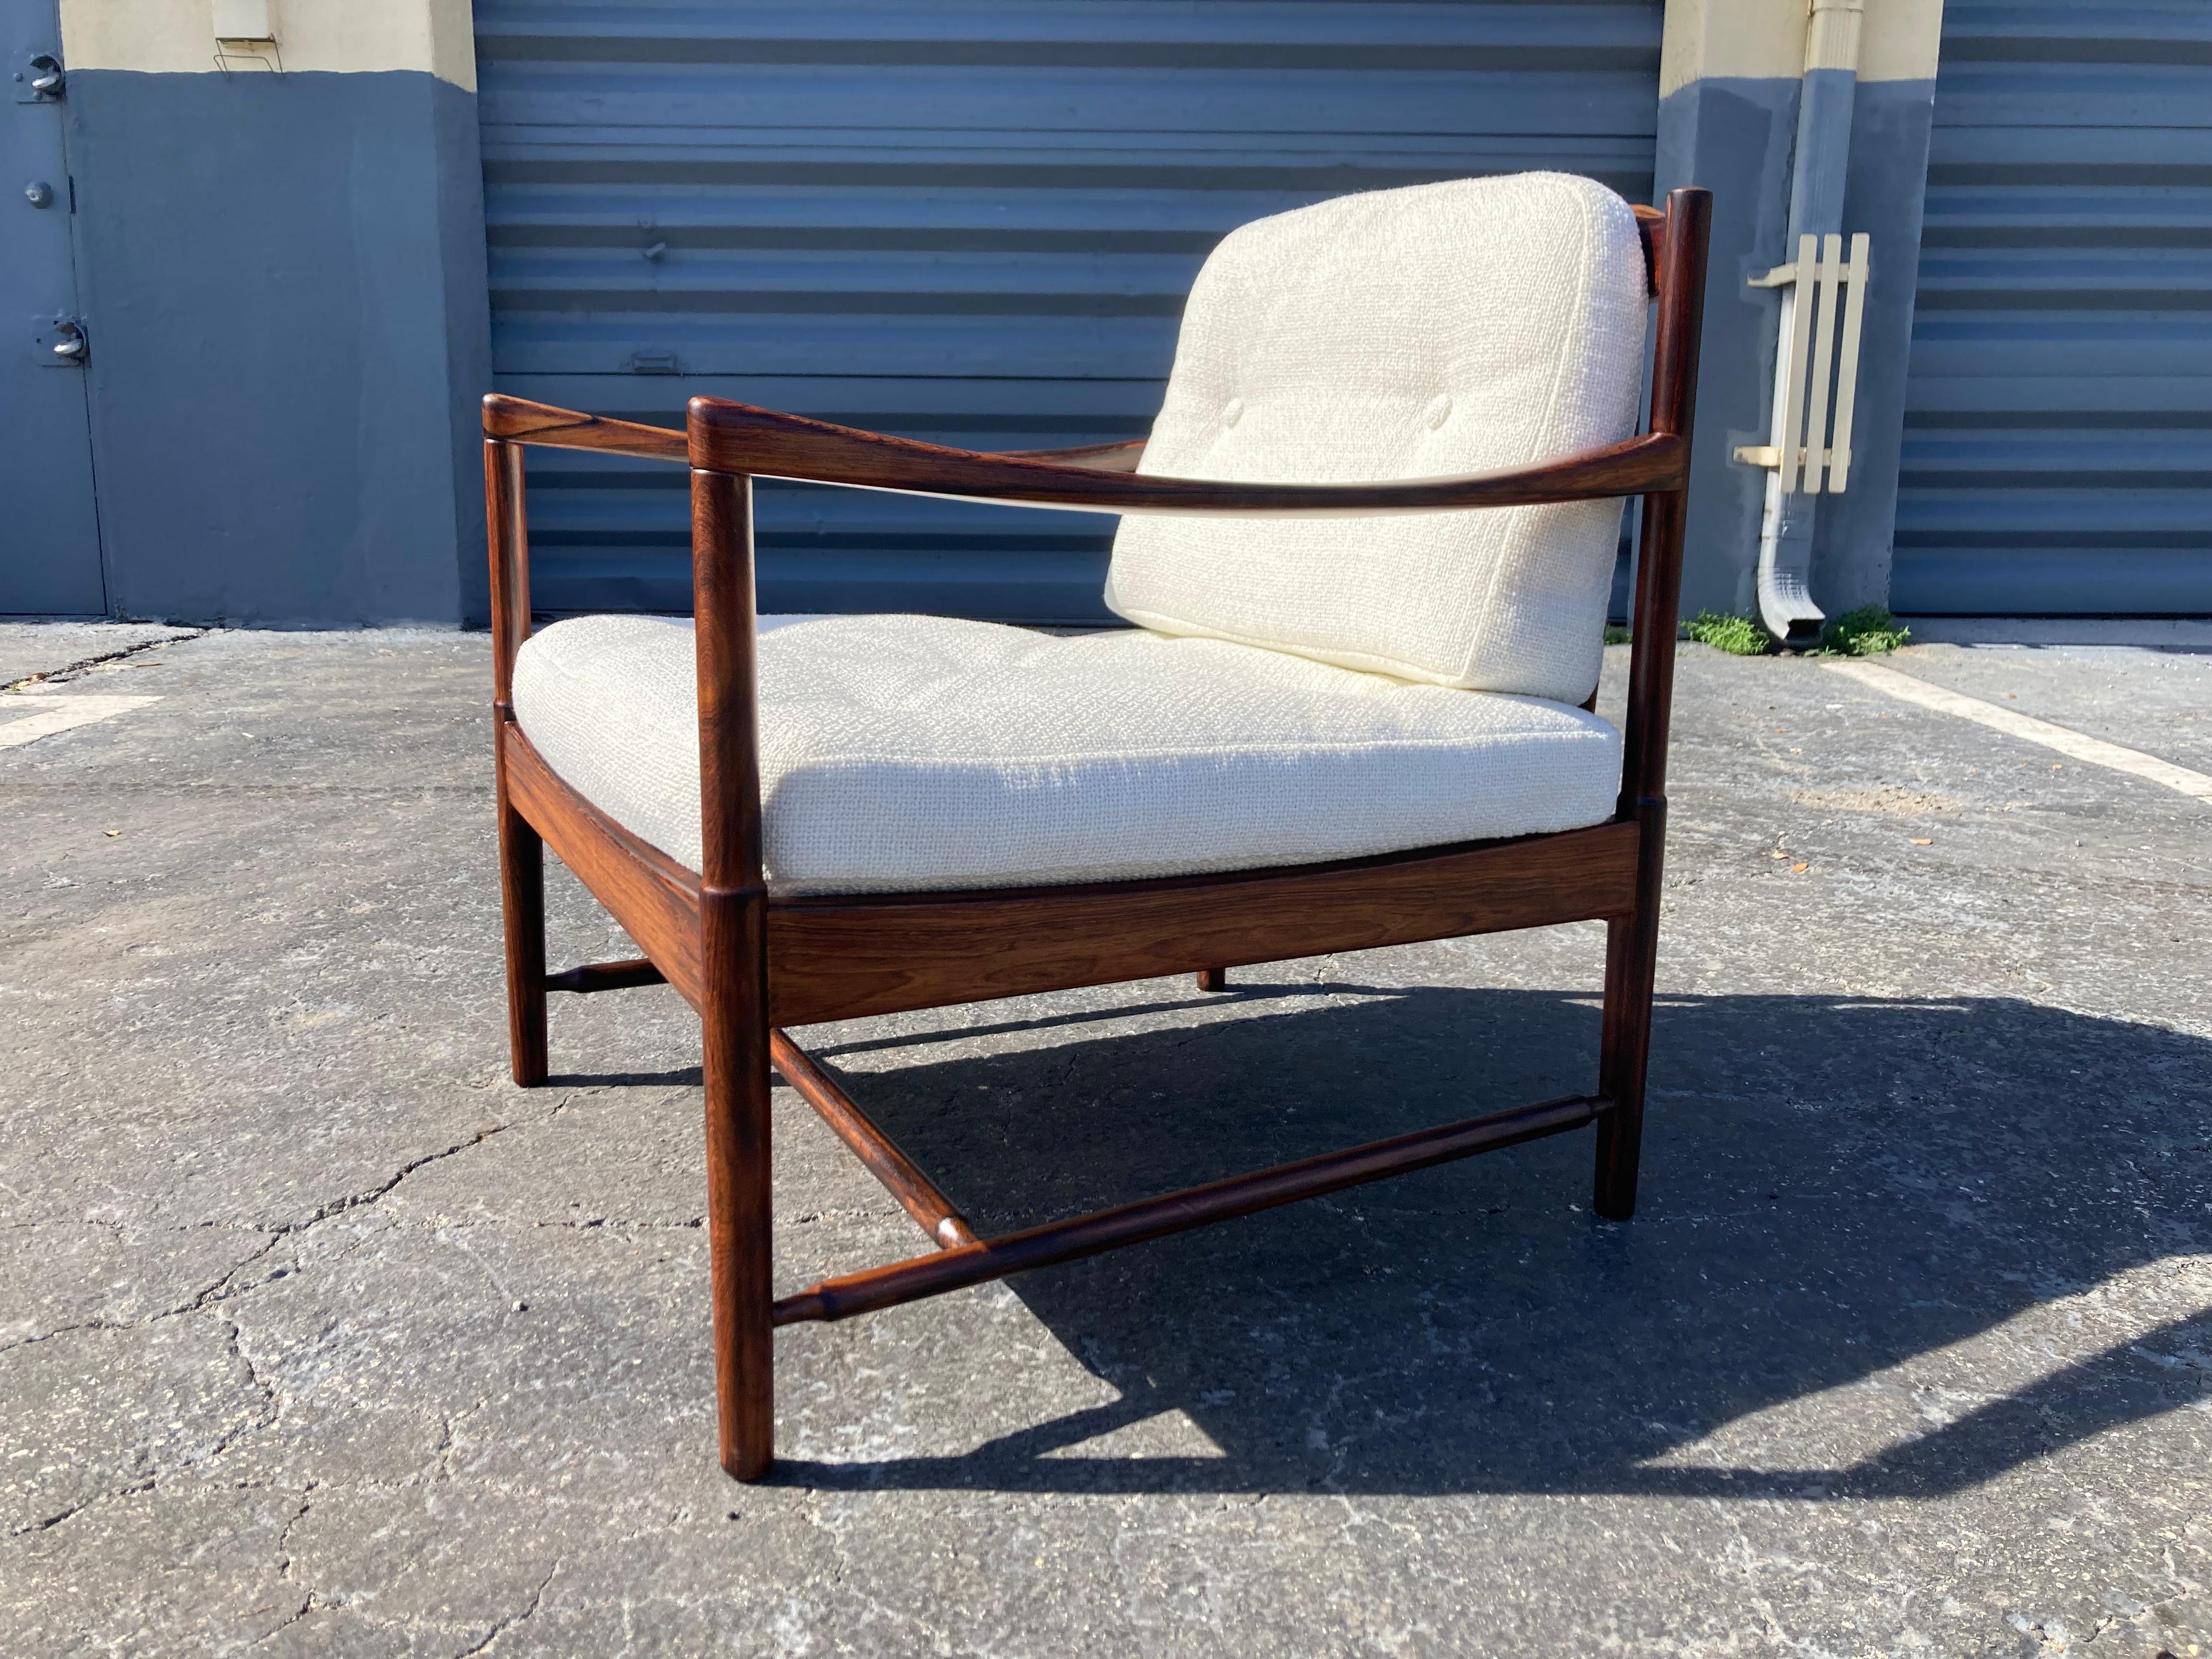 Pair of Rosewood Lounge Chairs Attributed to Kofod Larsen, Danish Modern For Sale 4